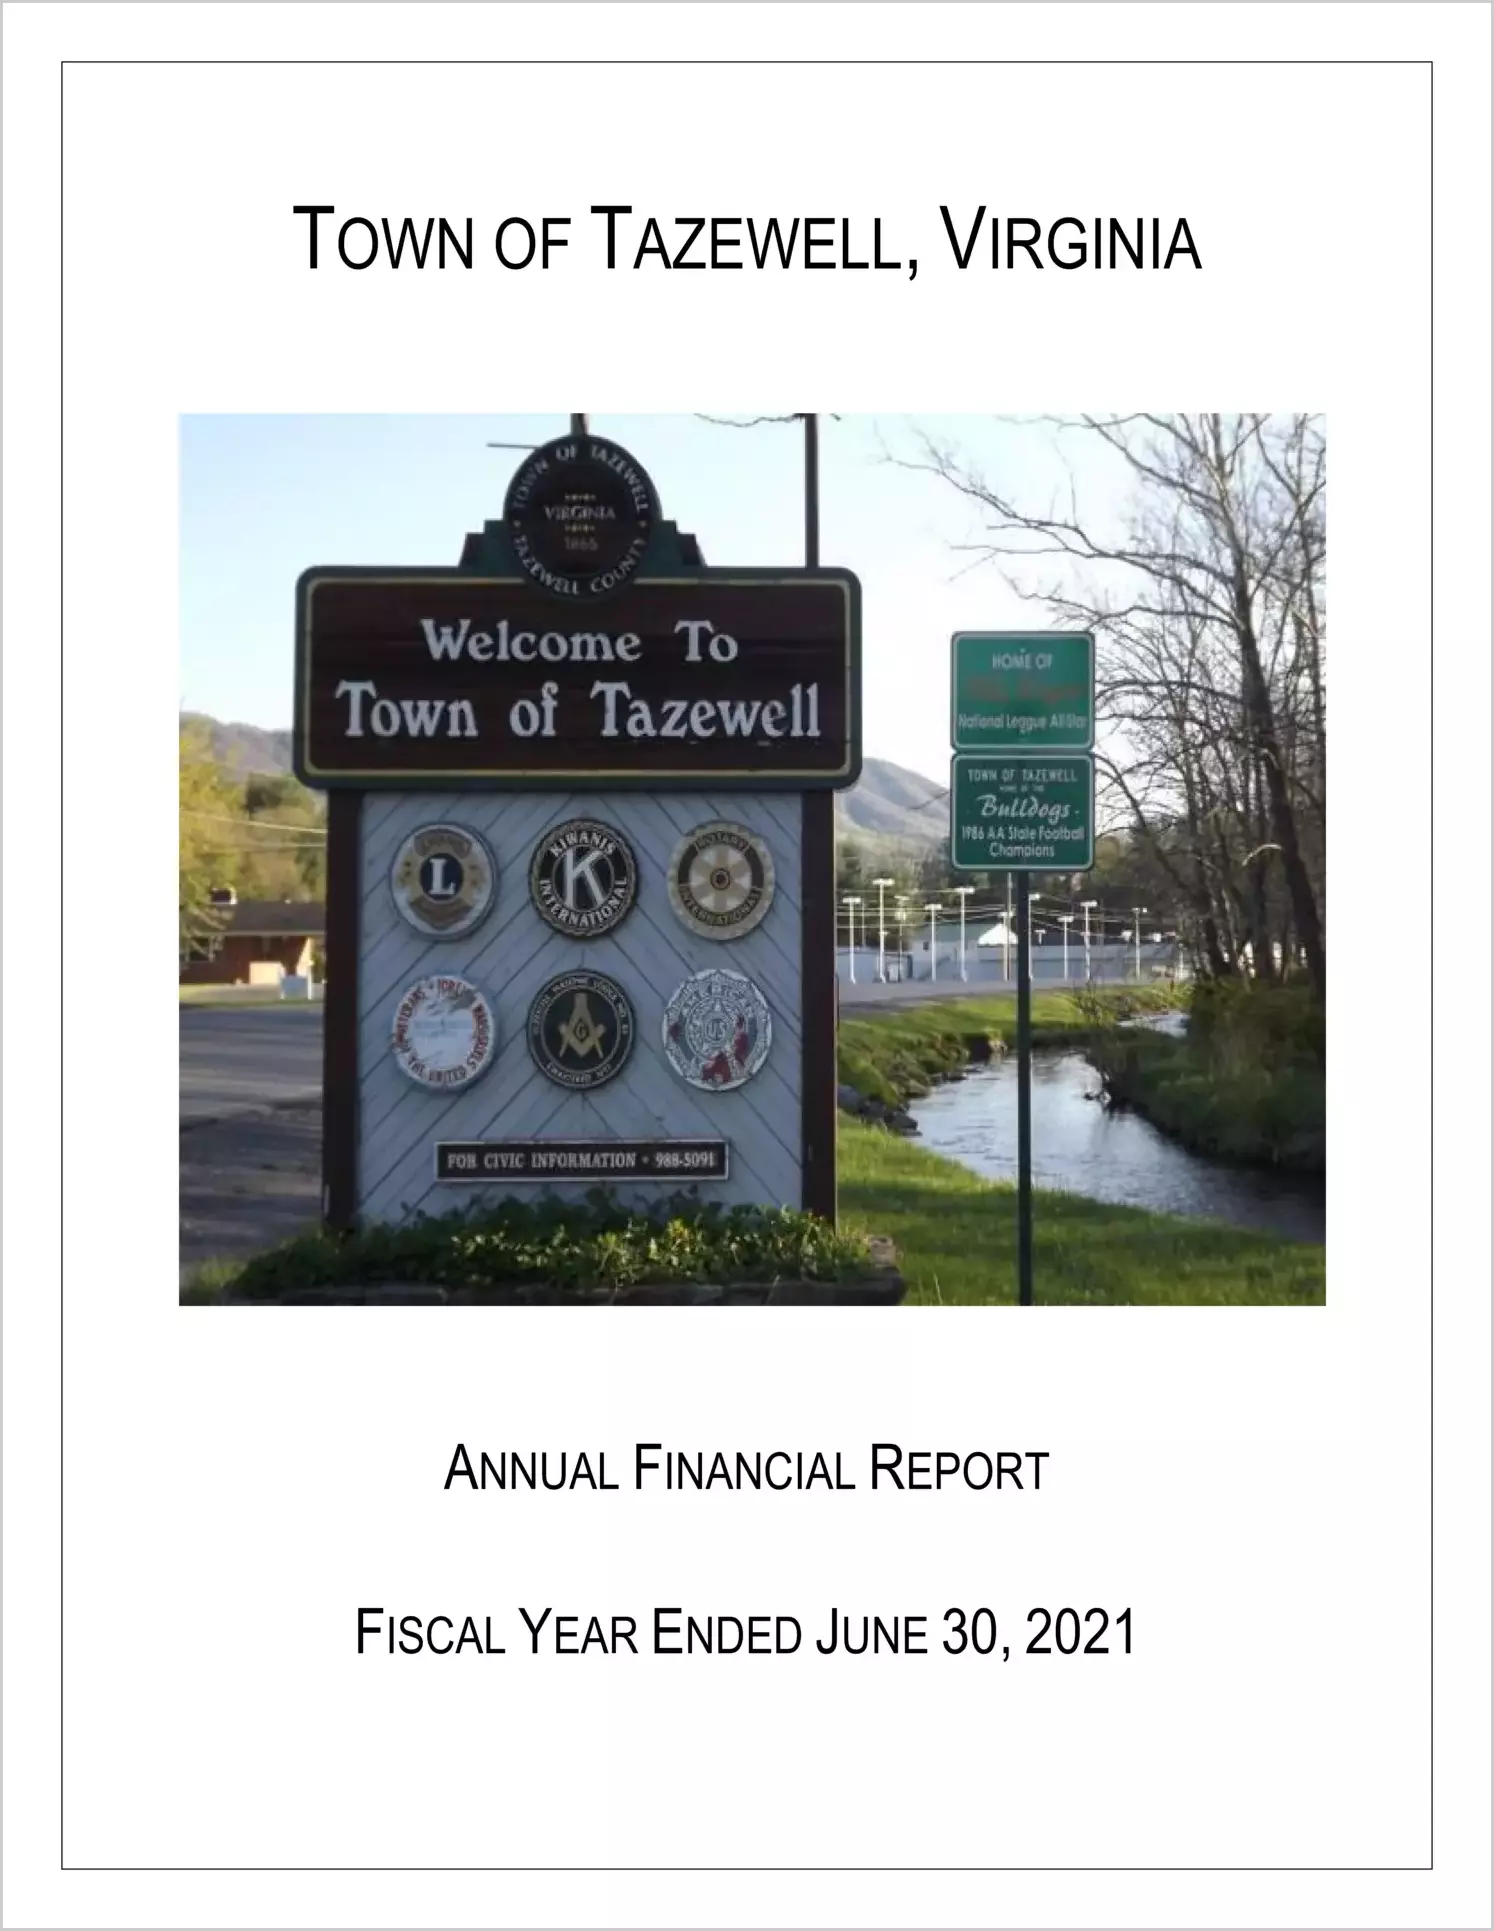 2021 Annual Financial Report for Town of Tazewell